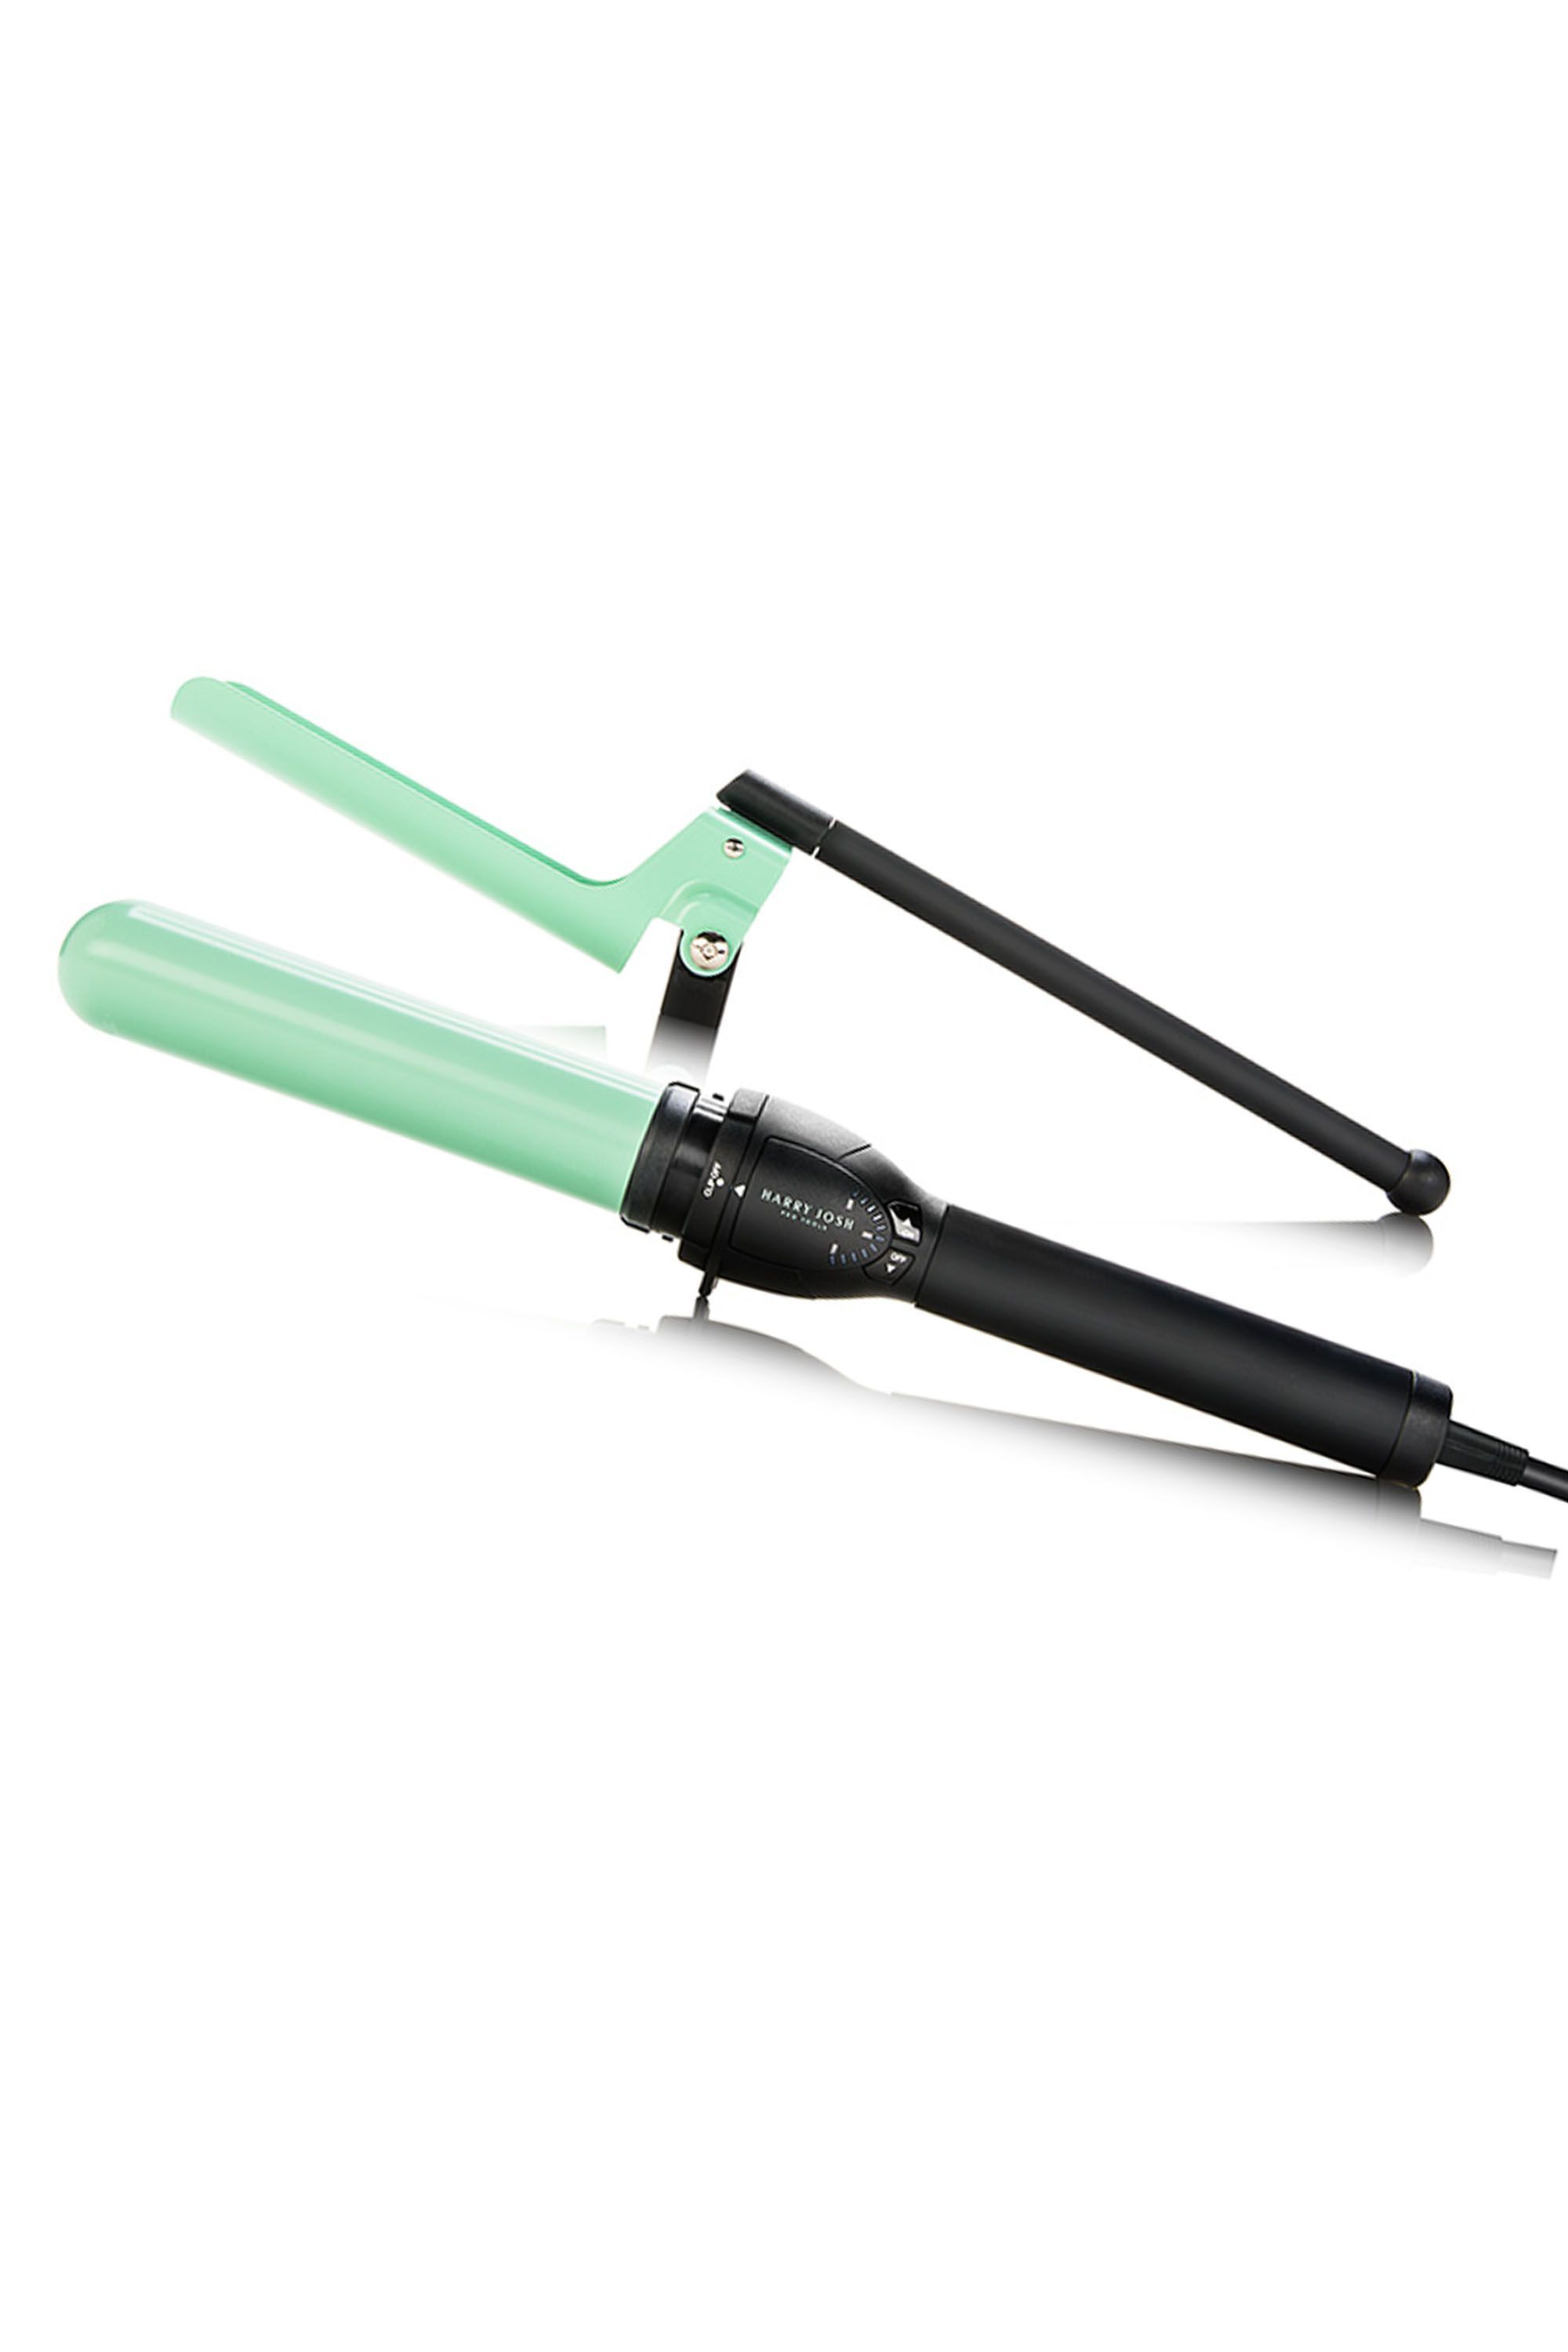 top rated hair curling tools